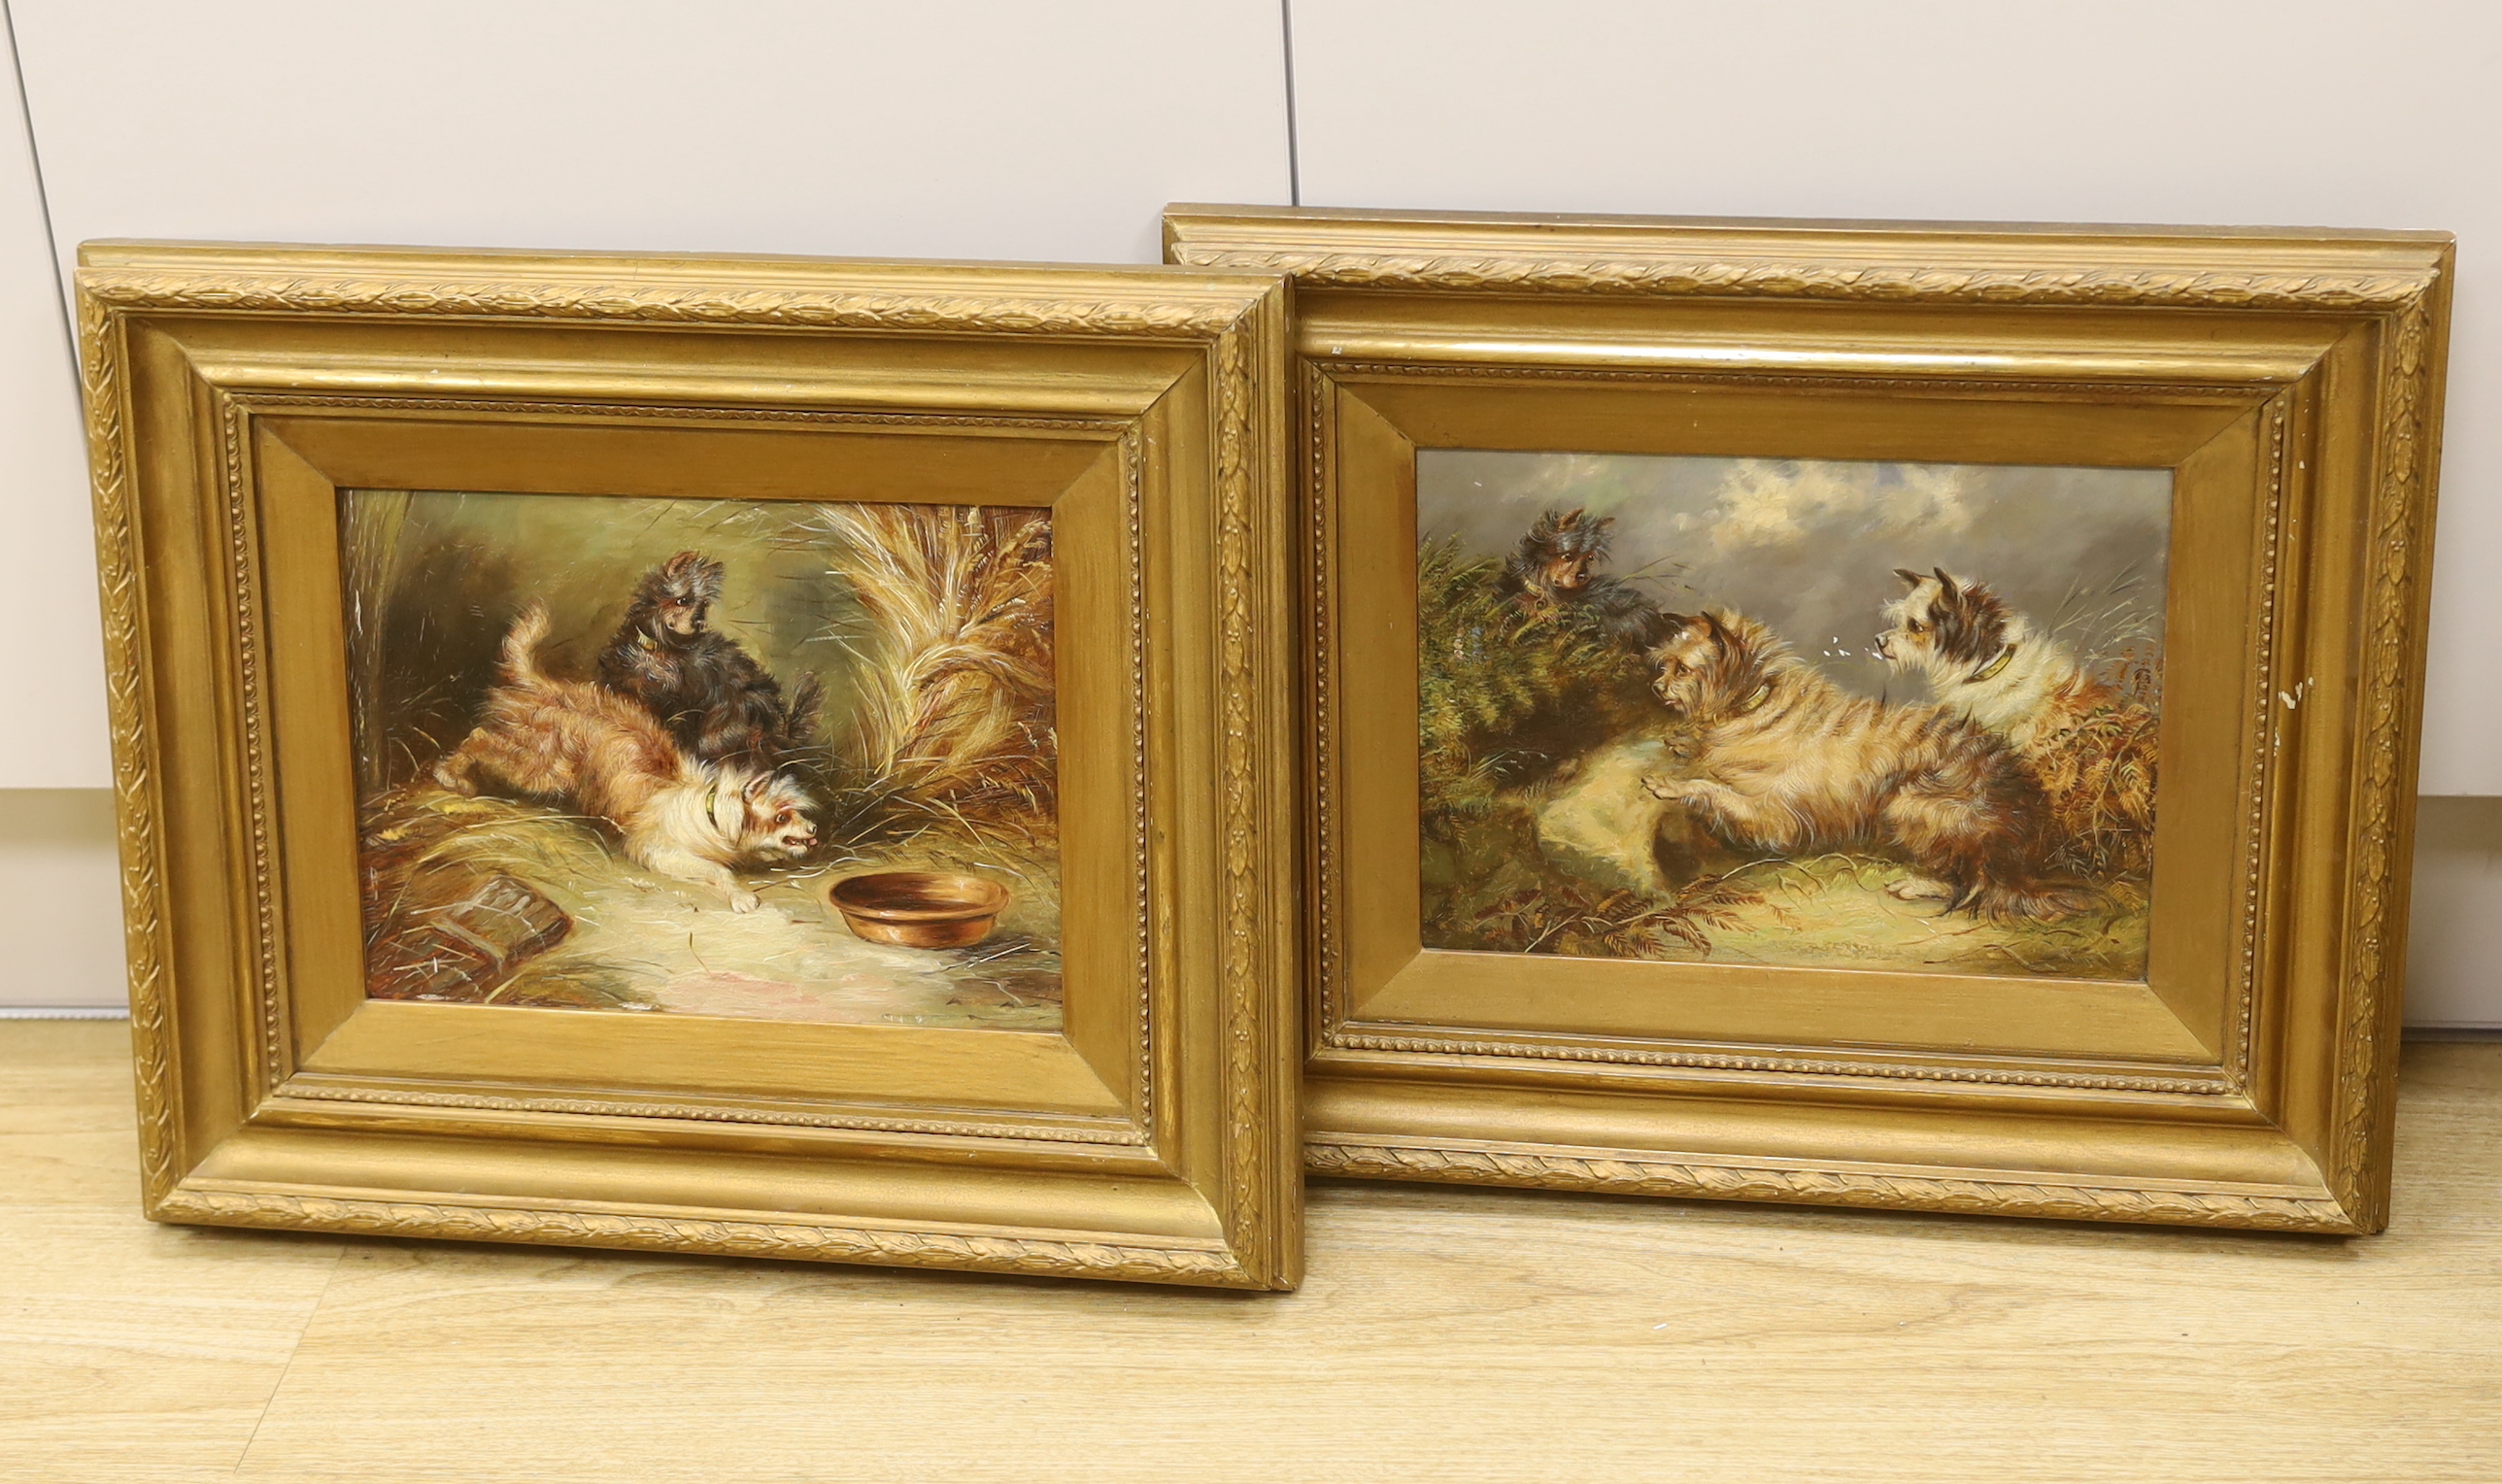 20th century School, pair of oils on board, 'Cairn terriers before landscapes', unsigned, each 22 x 29cm, ornate gilt framed